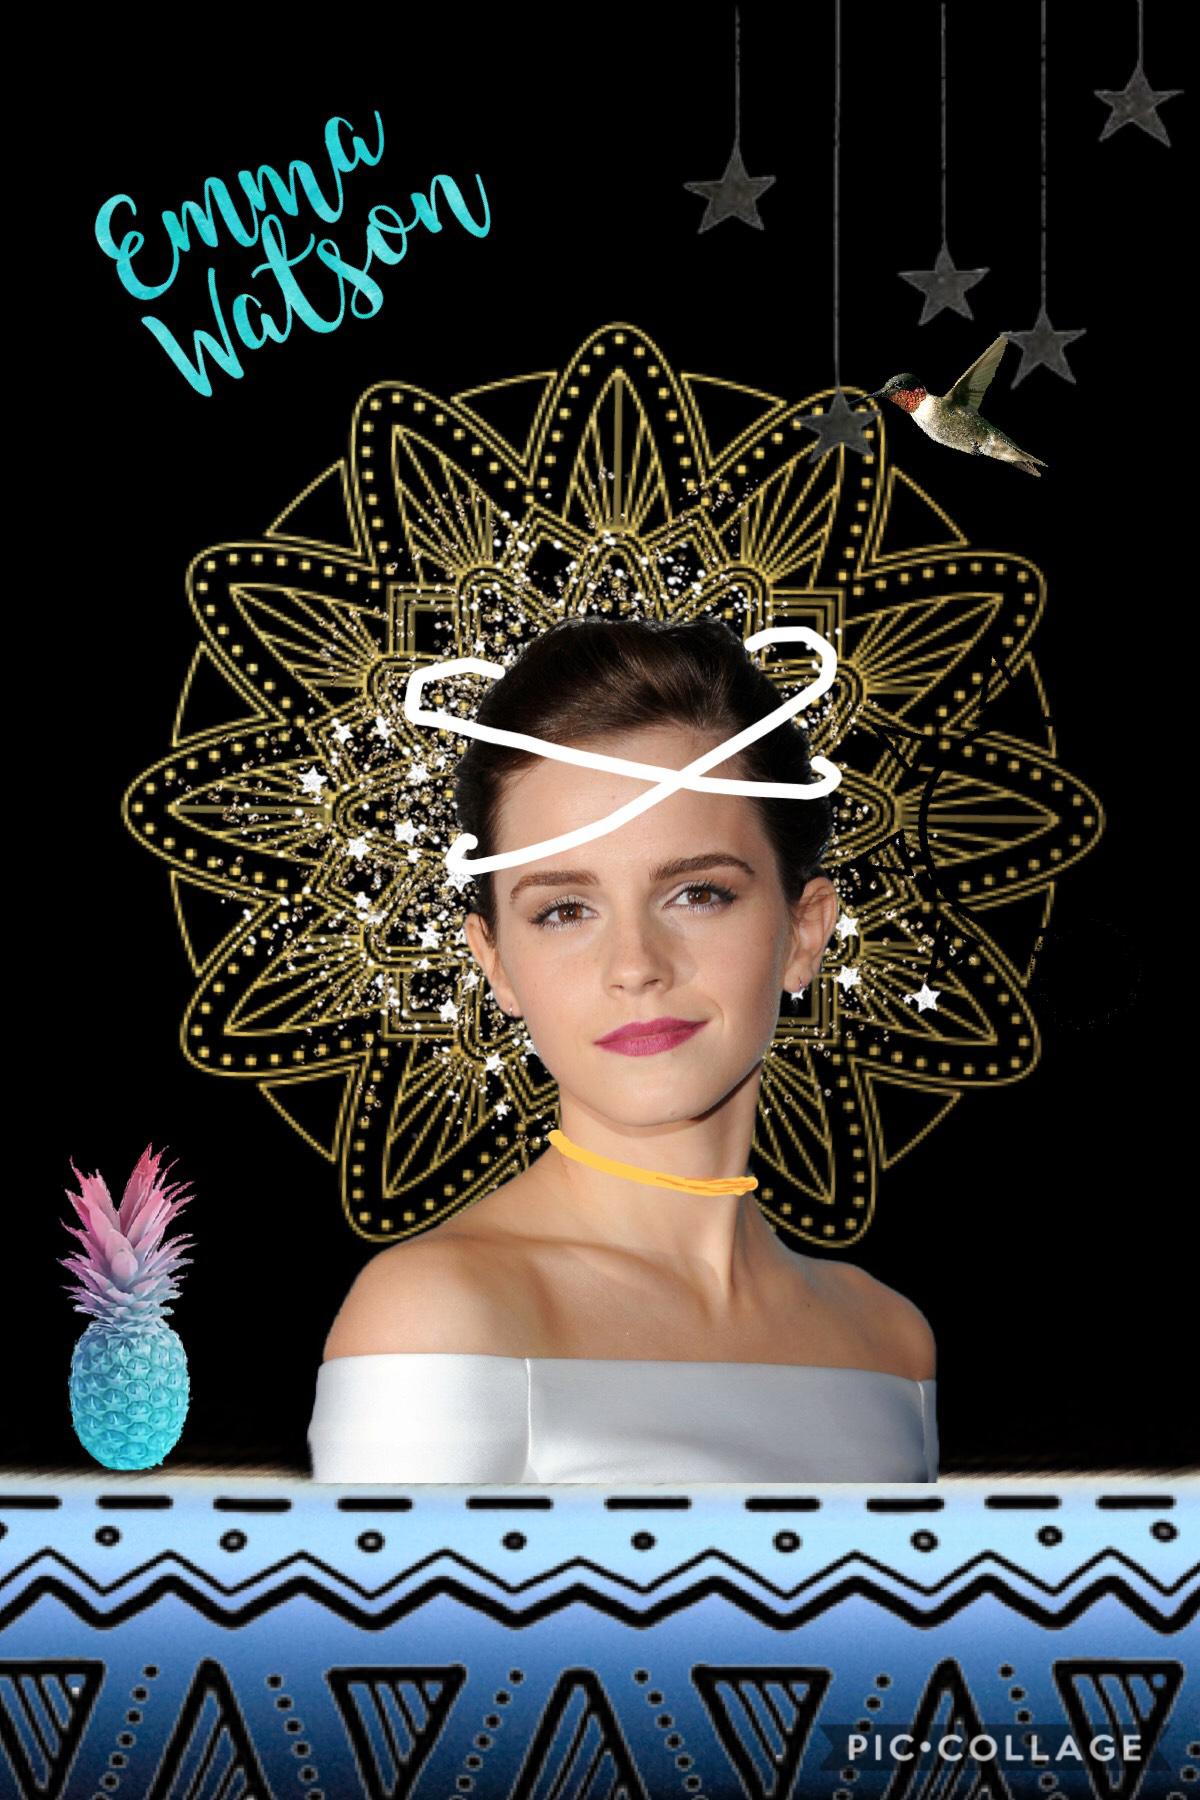 I made this edit of Emma Watson.
I know it’s rubbish but it’s my first one and I tried ok??